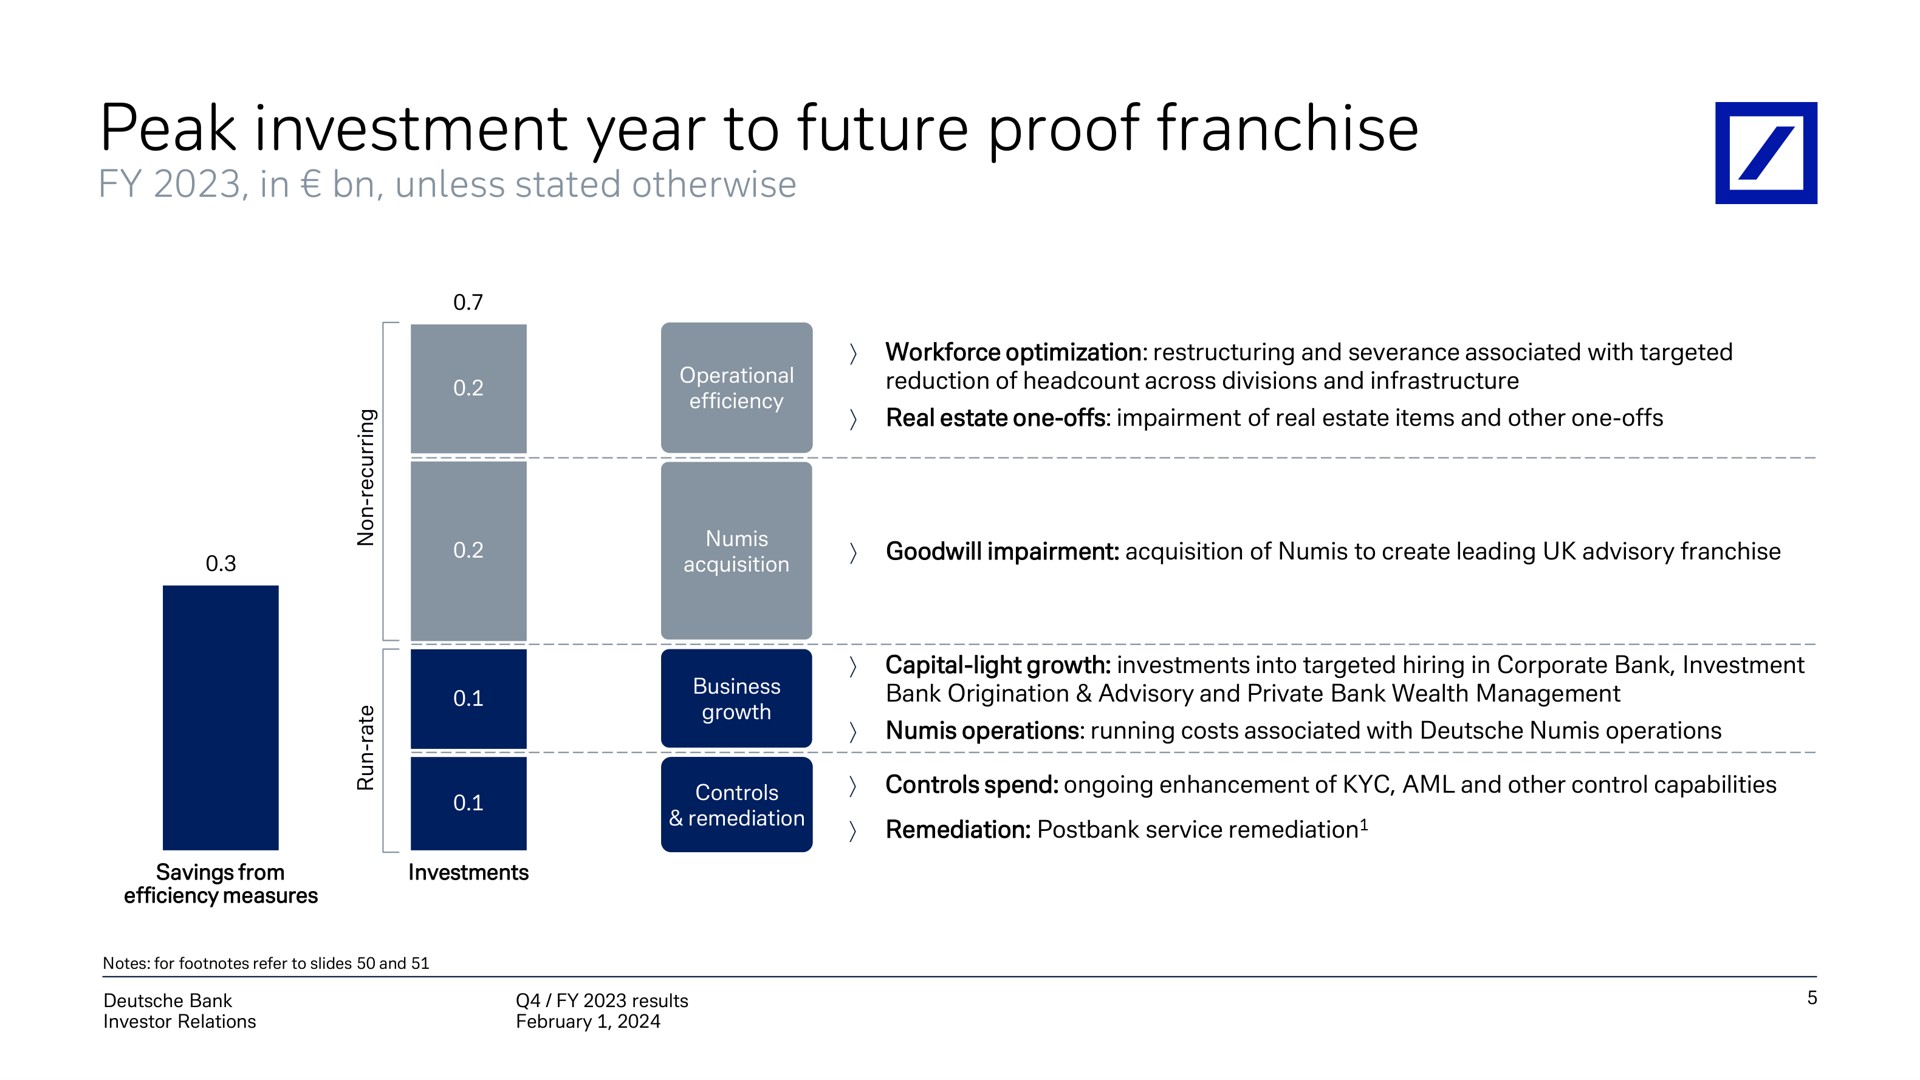 peak investment year to future proof franchise | Deutsche Bank